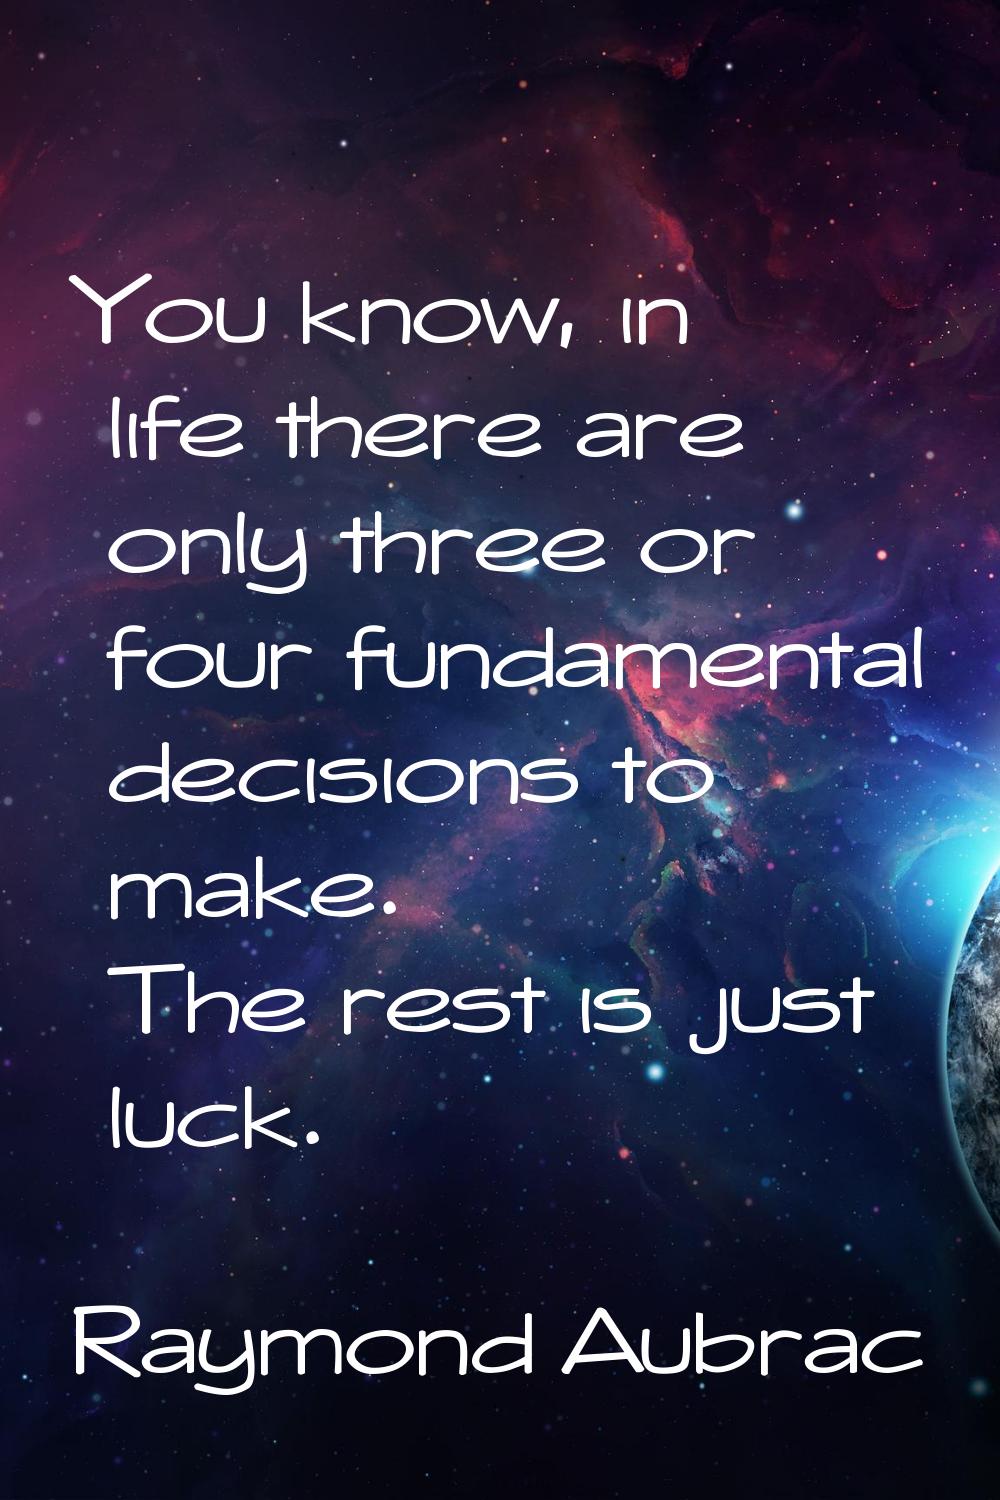 You know, in life there are only three or four fundamental decisions to make. The rest is just luck